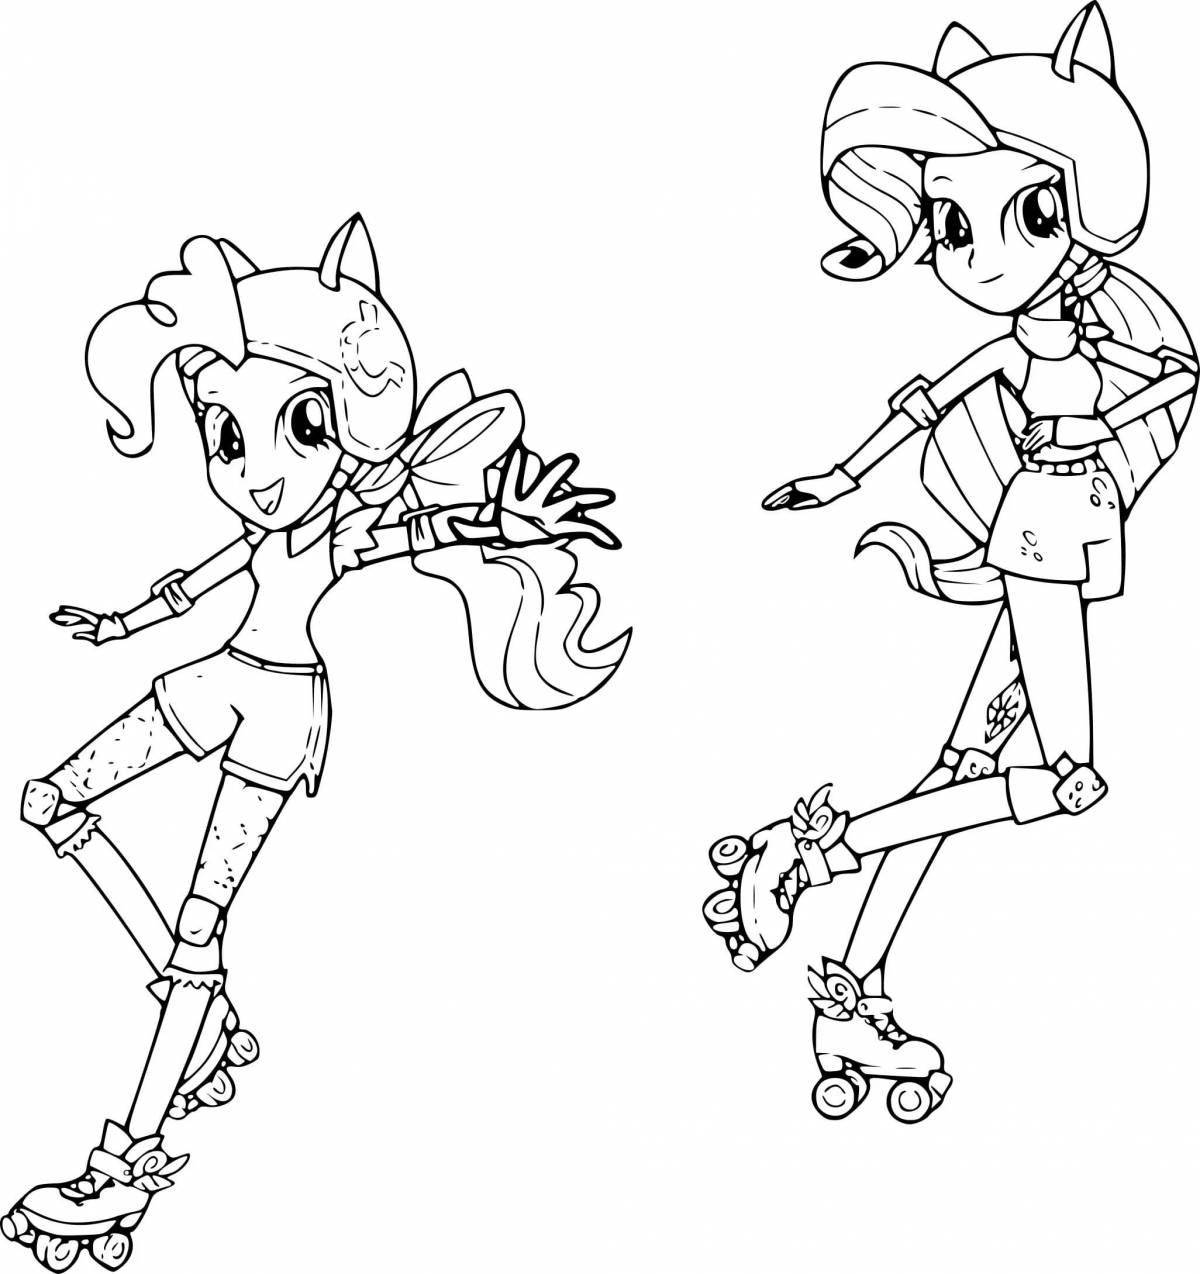 Pinkie Pie's funny coloring book for equestria girls